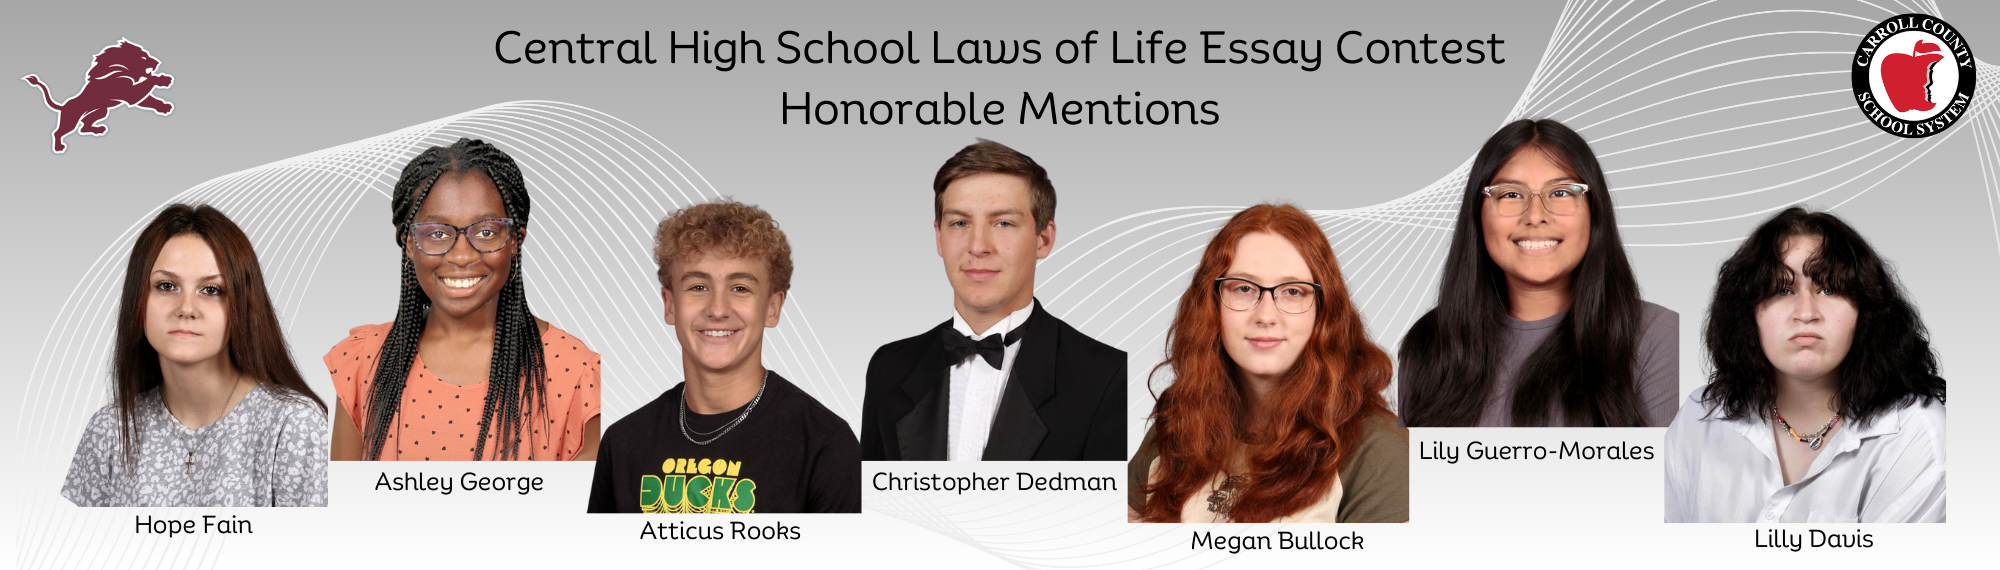 Law of Life Essay Honorable Mentions